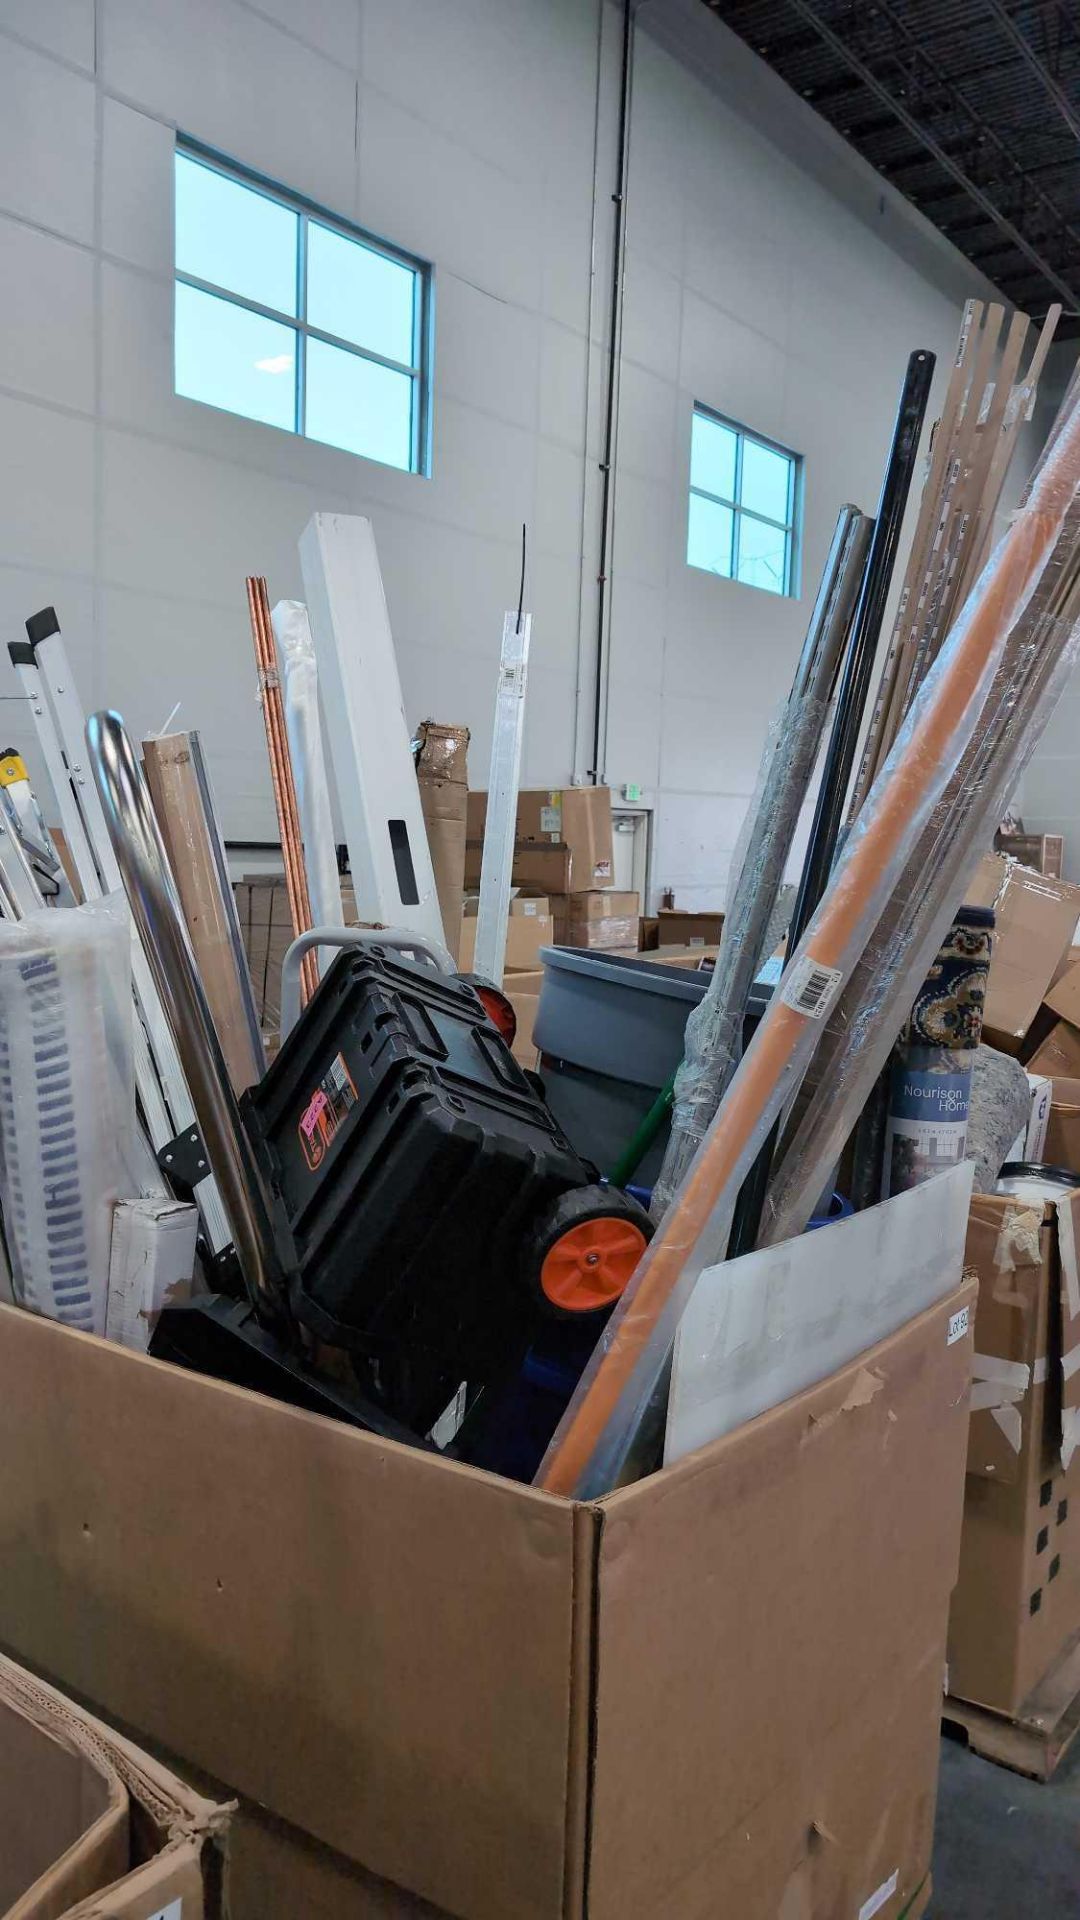 tool storage, Ladders, Rug, Poles, garbage cans and more - Image 2 of 8